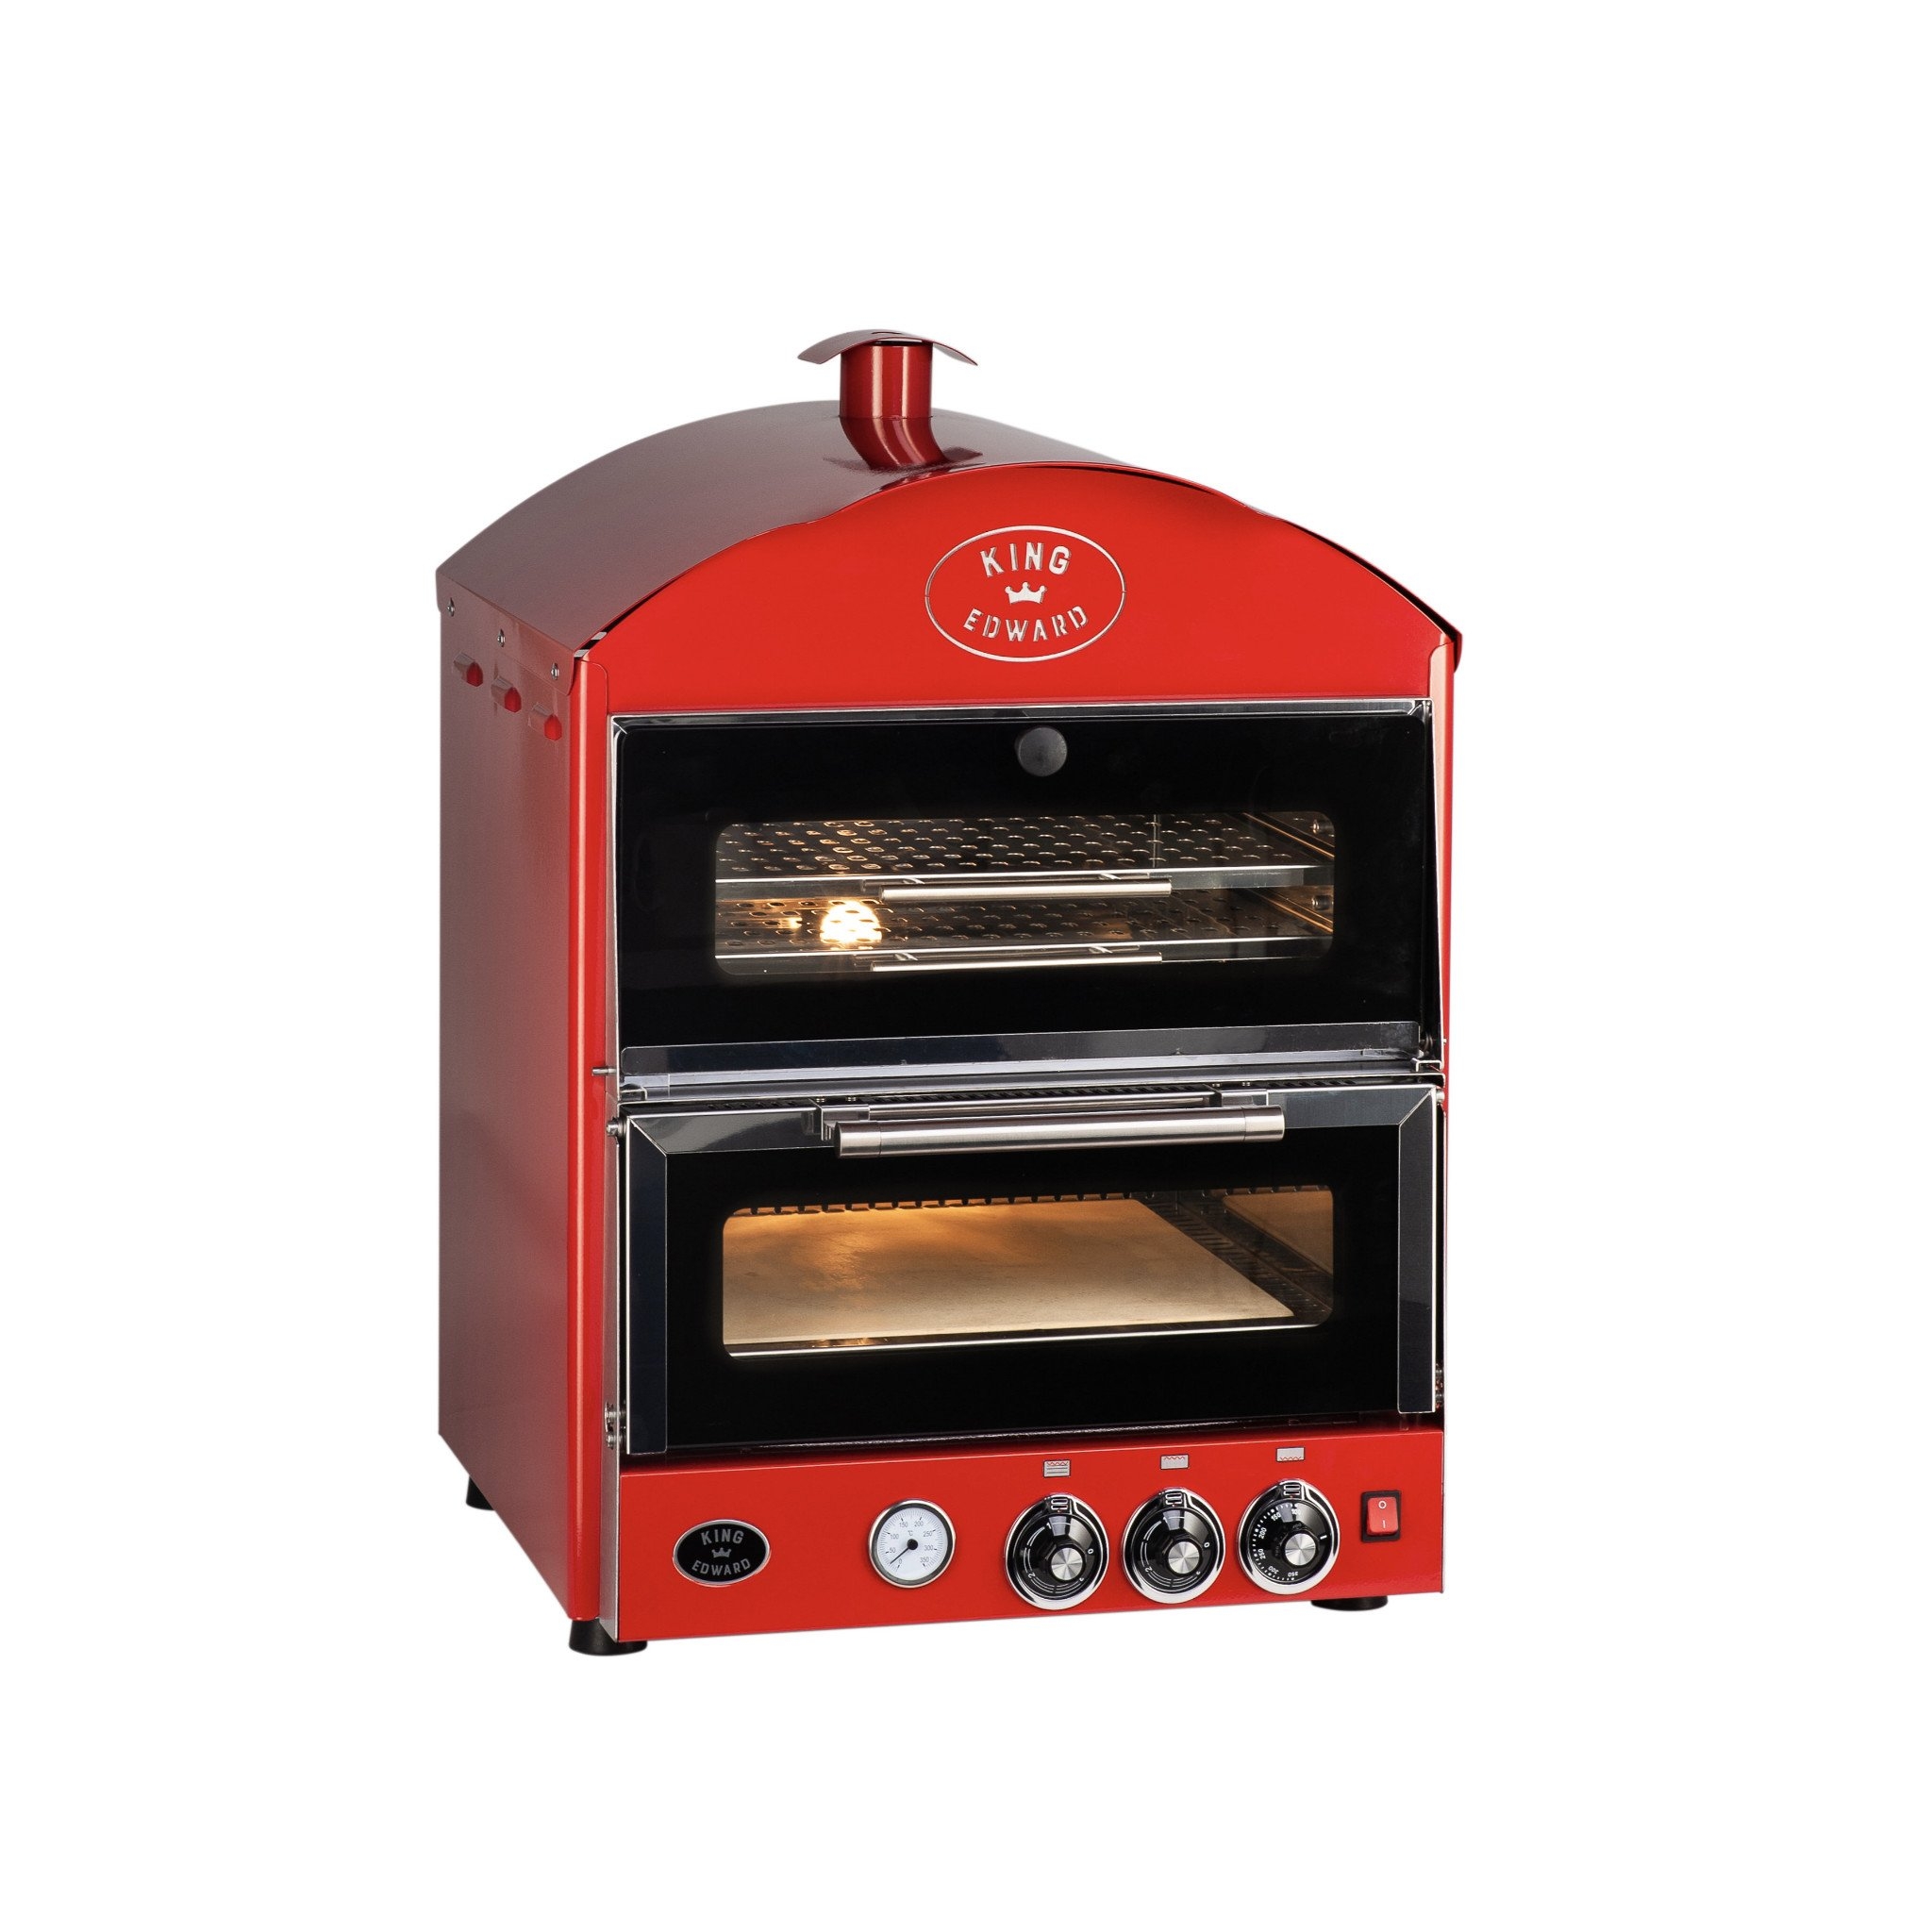 King Edward Stone-Baked Pizza King Oven with Warmer – Red – Outdoor Pizza Oven – Forno Boutique